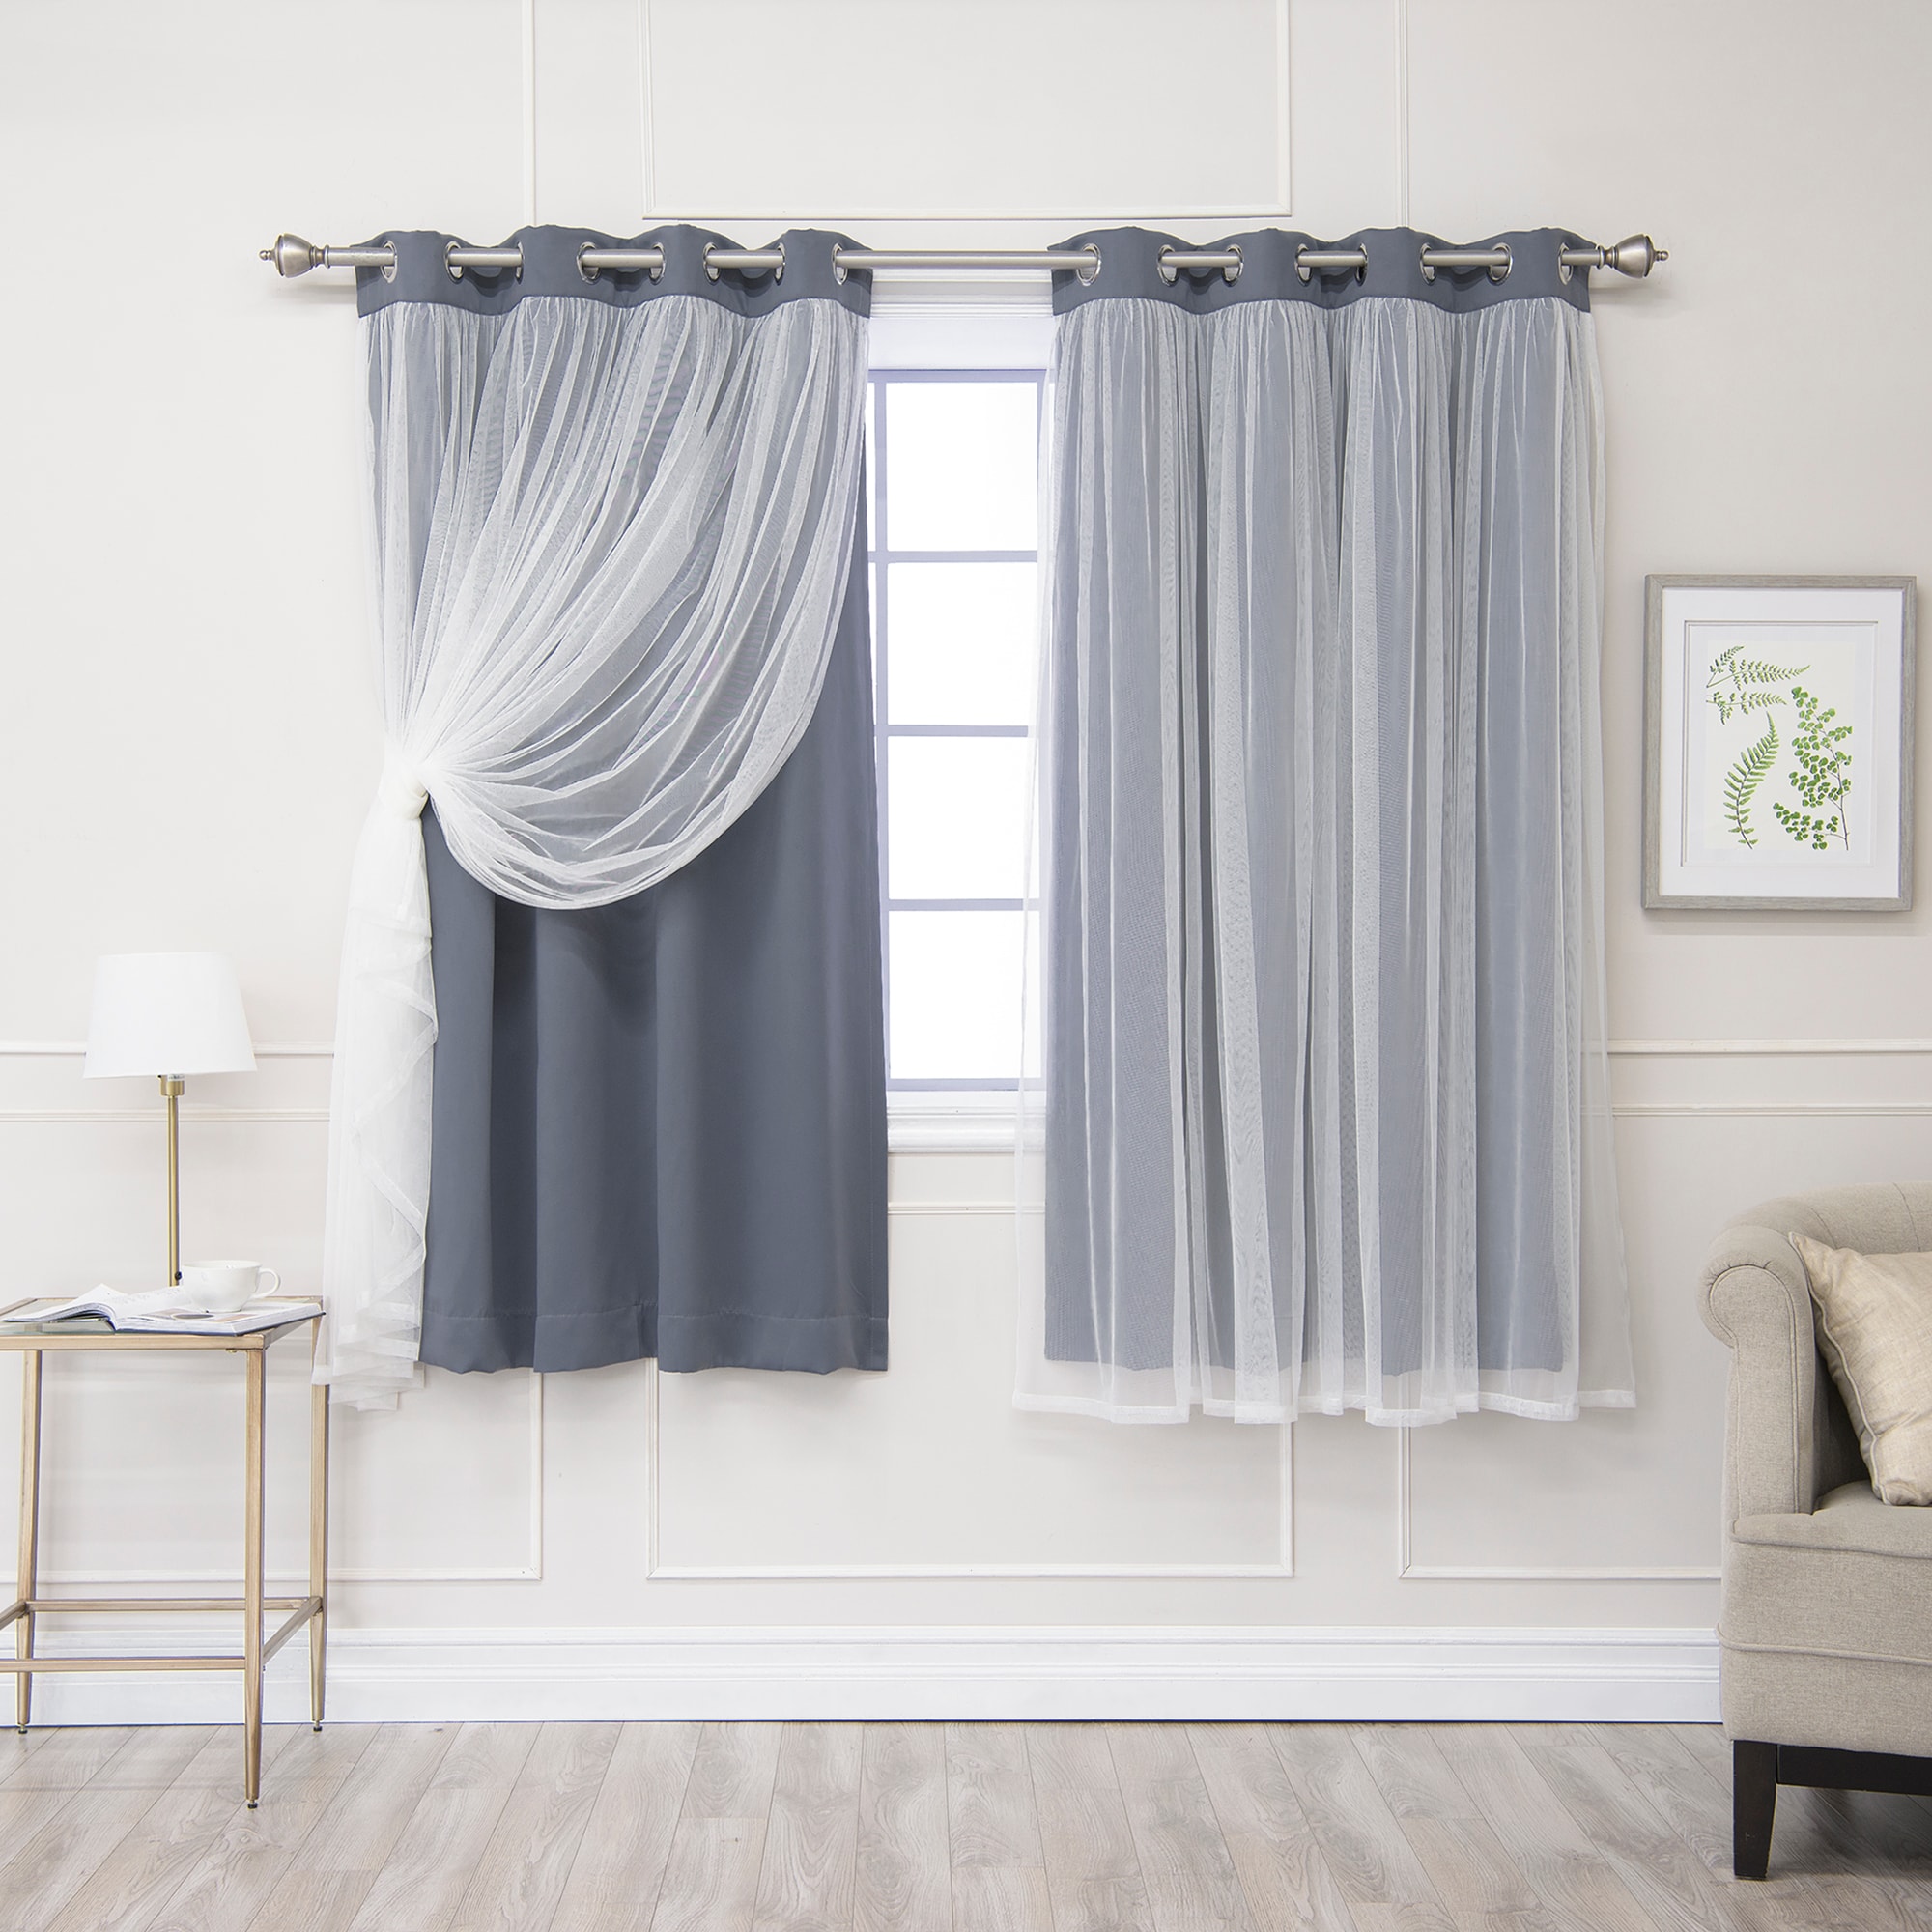 Best Home Fashion 52'' W x 63'' L Brockham Solid Blackout Grommet Curtain  Panels(Set of 2) Stone in the Curtains & Drapes department at Lowes.com